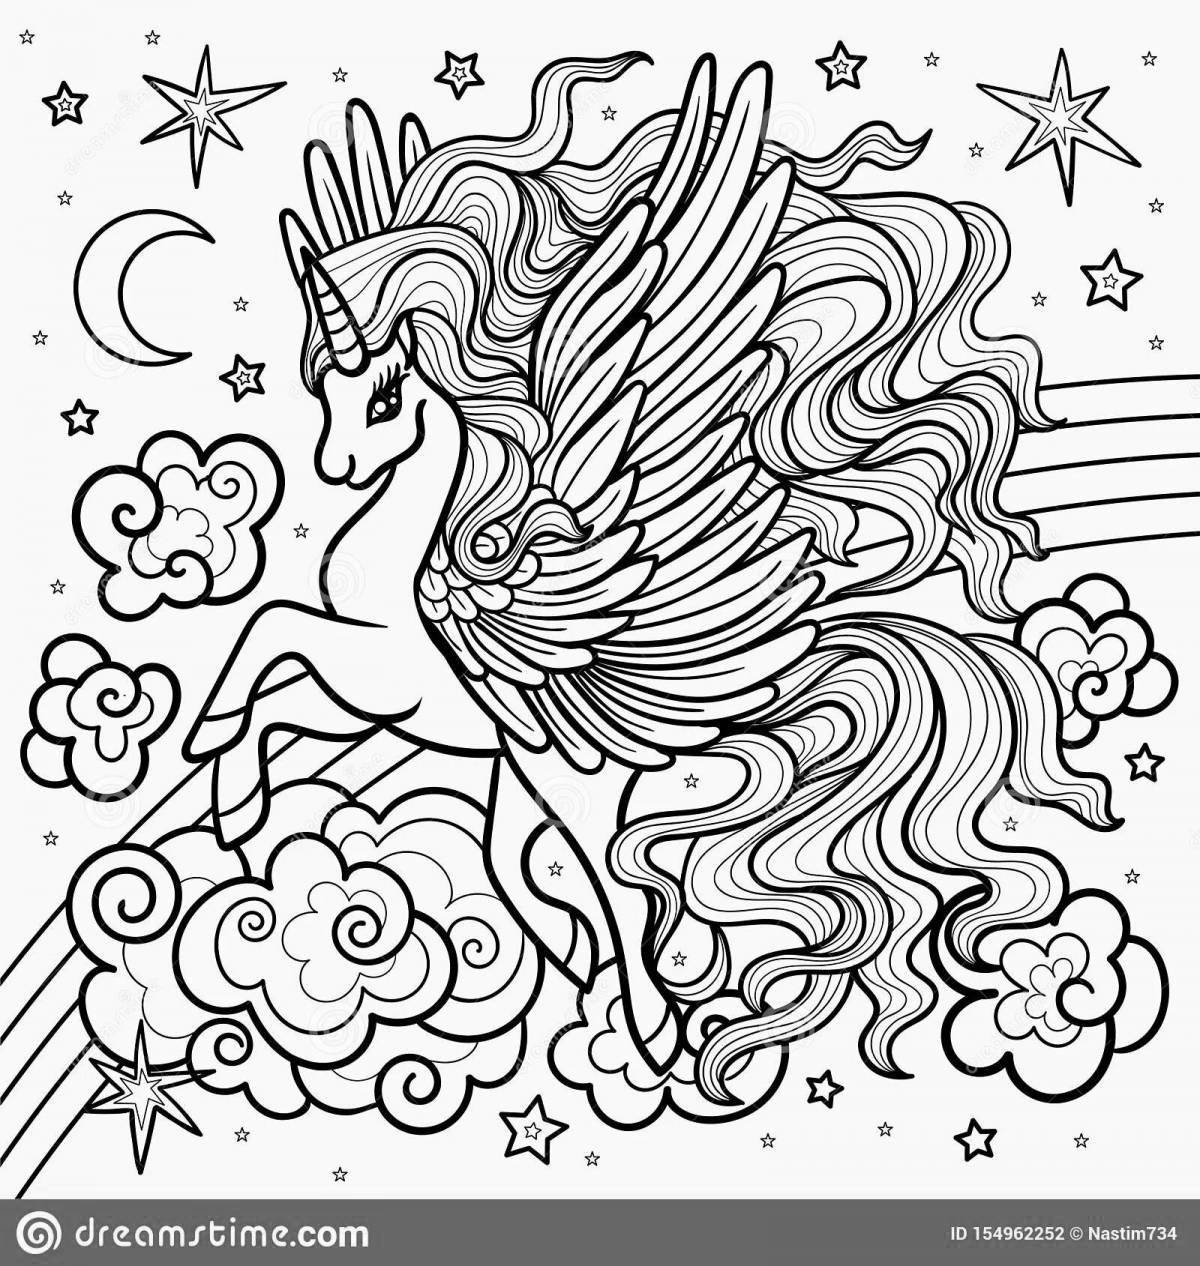 Colorful Rainbow Friends Animated Coloring Page